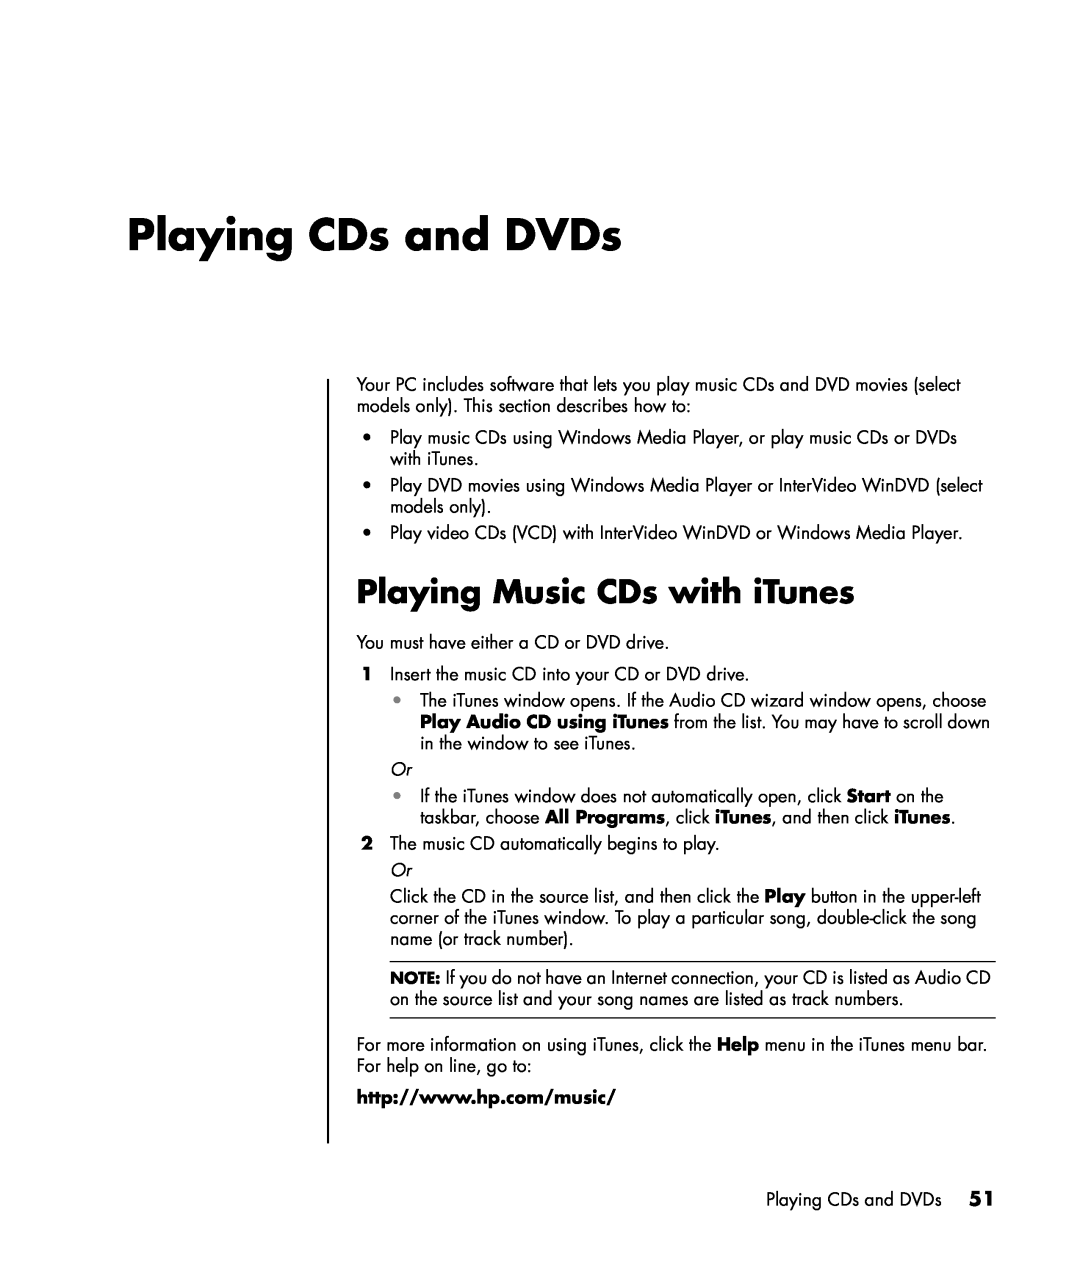 HP a1163w, a1173w, a1140n, a1133w, a1102n, a1104x, a1106n, a1100n, a1130n Playing CDs and DVDs, Playing Music CDs with iTunes 